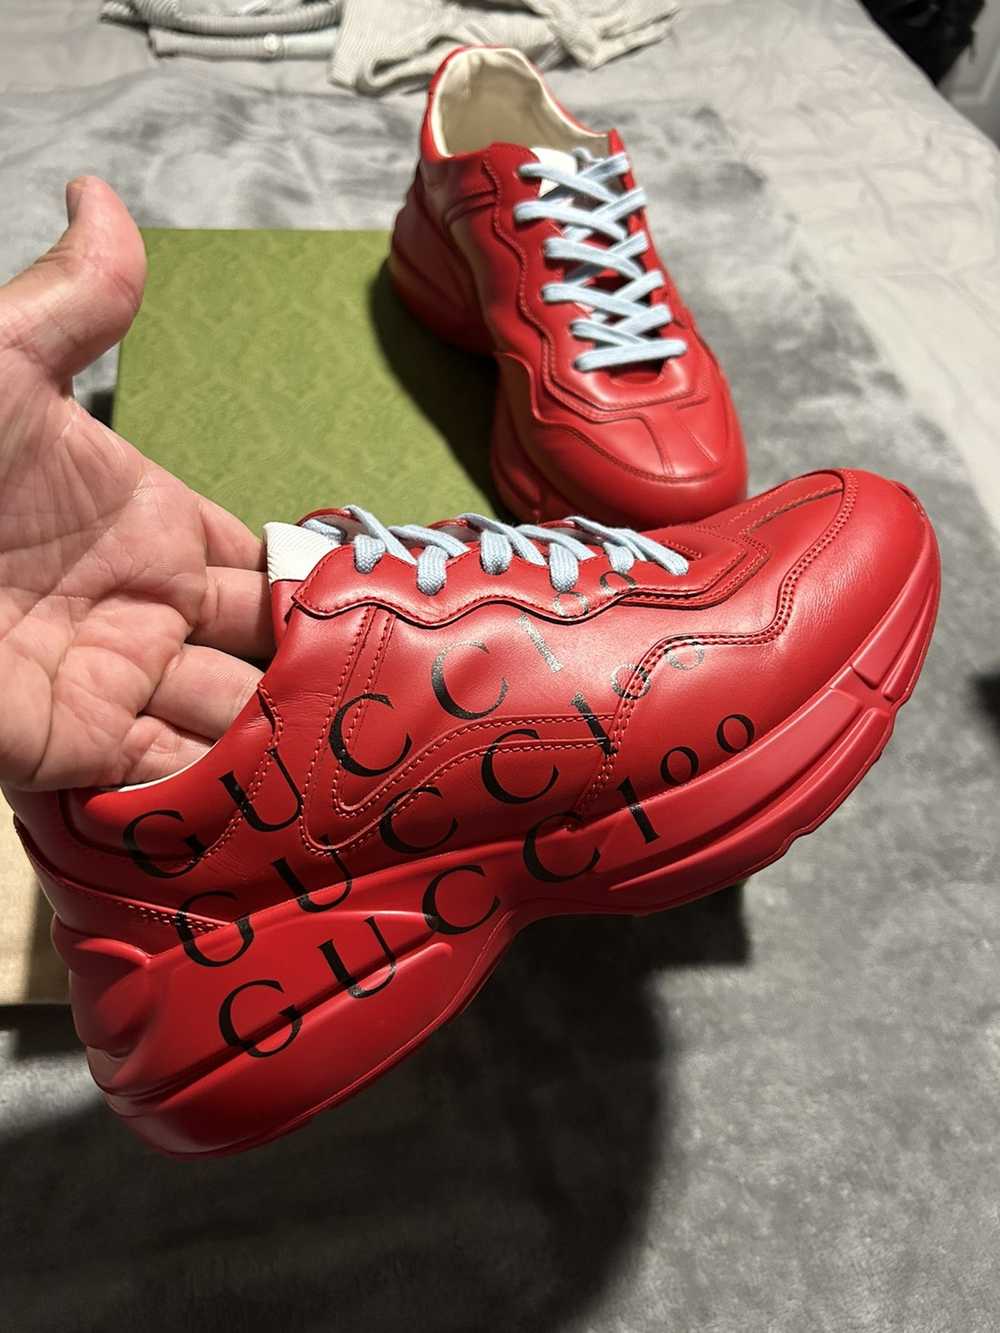 Gucci Gucci 100 Rython sneakers - image 2